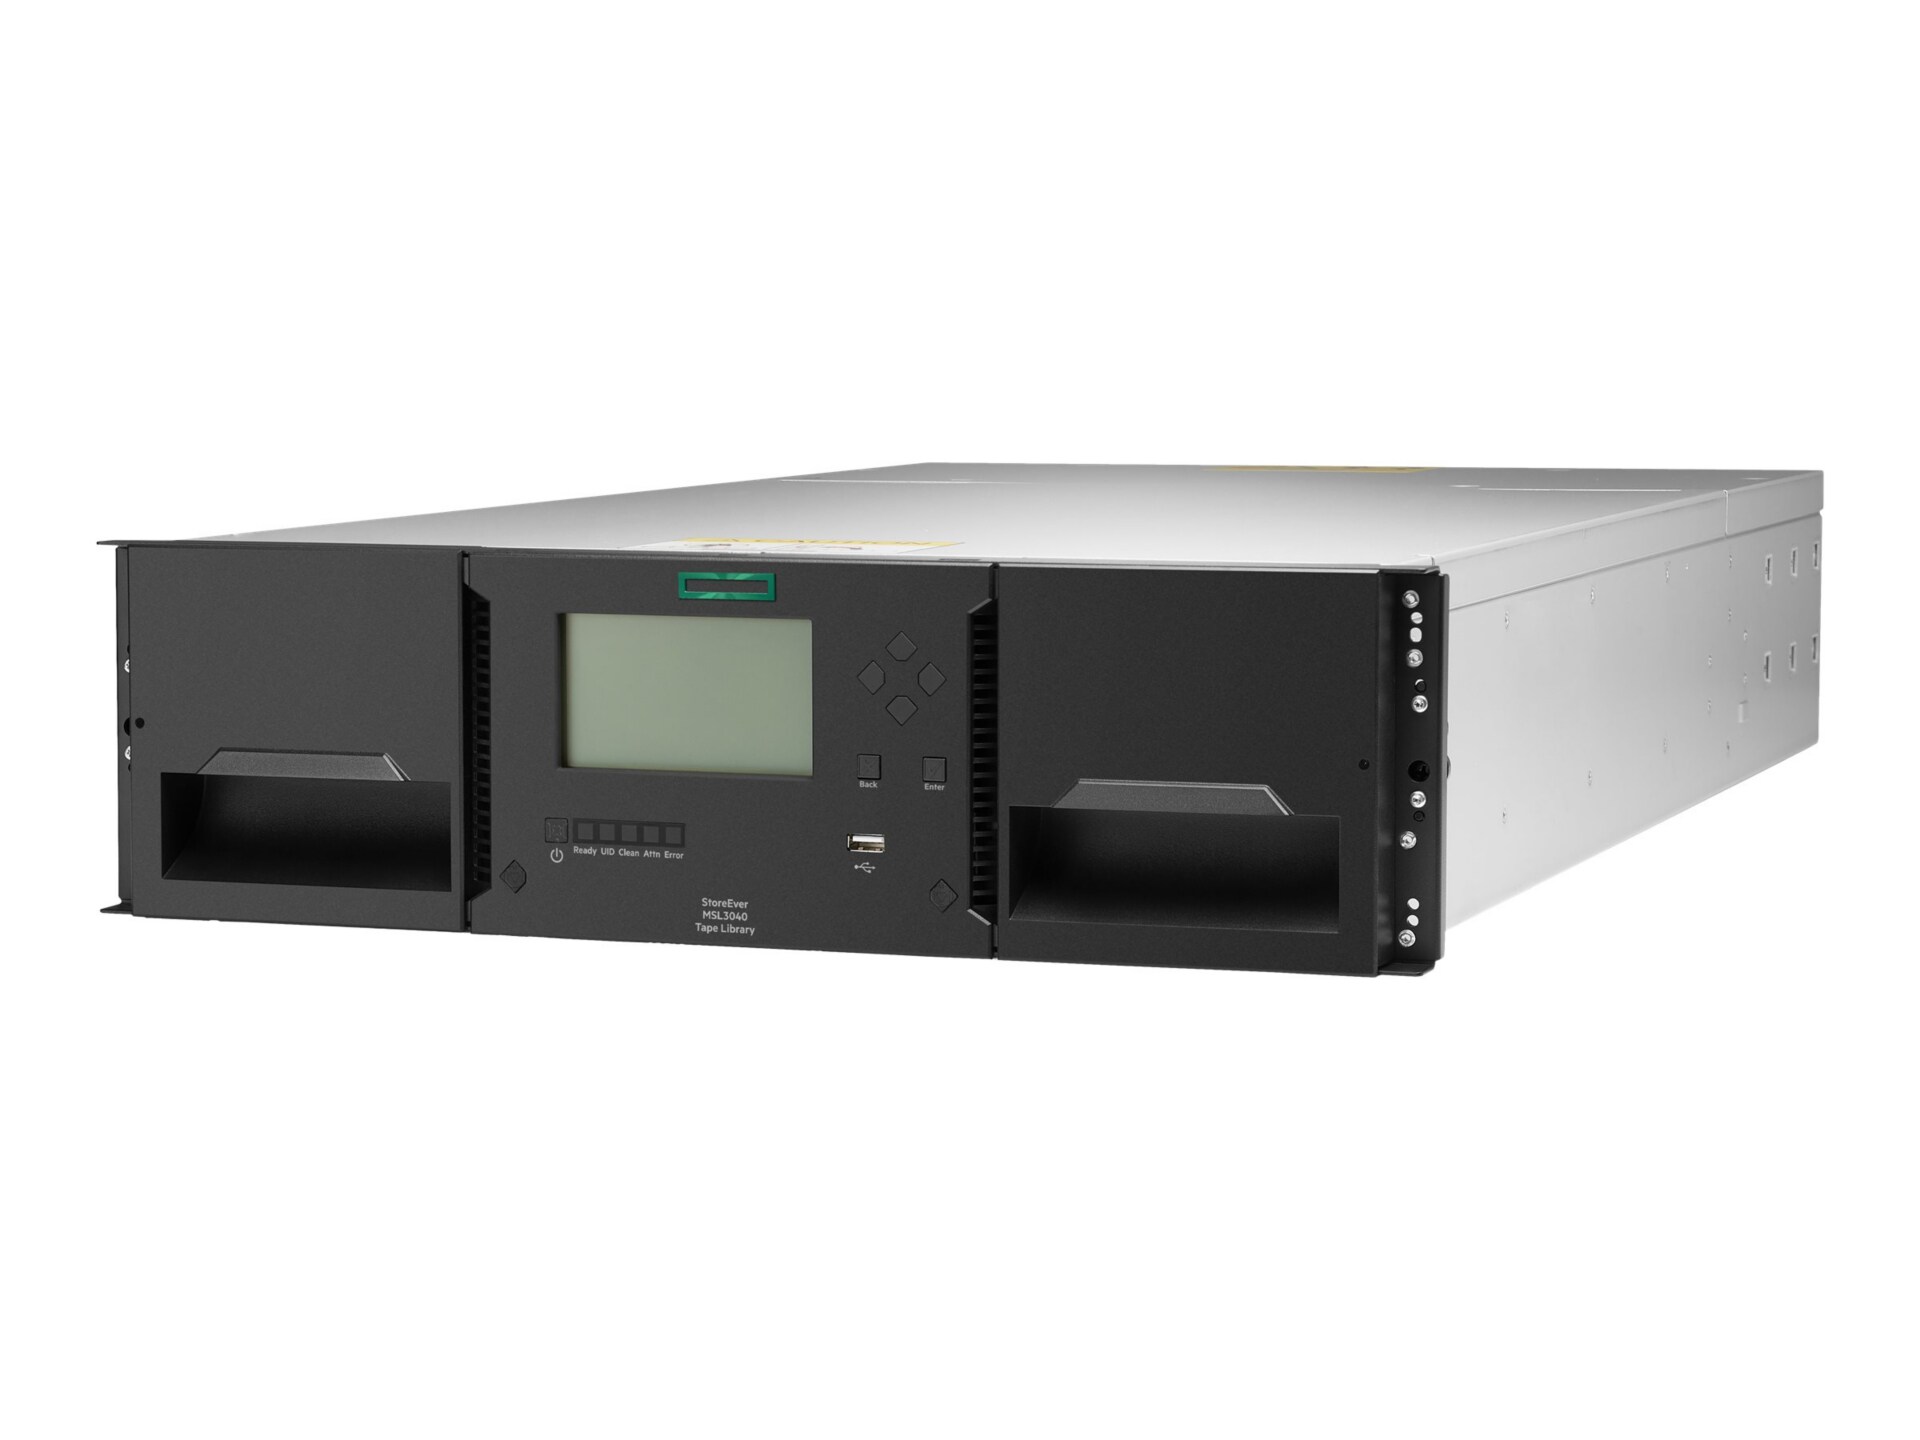 HPE StoreEver MSL3040 Scalable Library Base Module - tape library - no tape drives